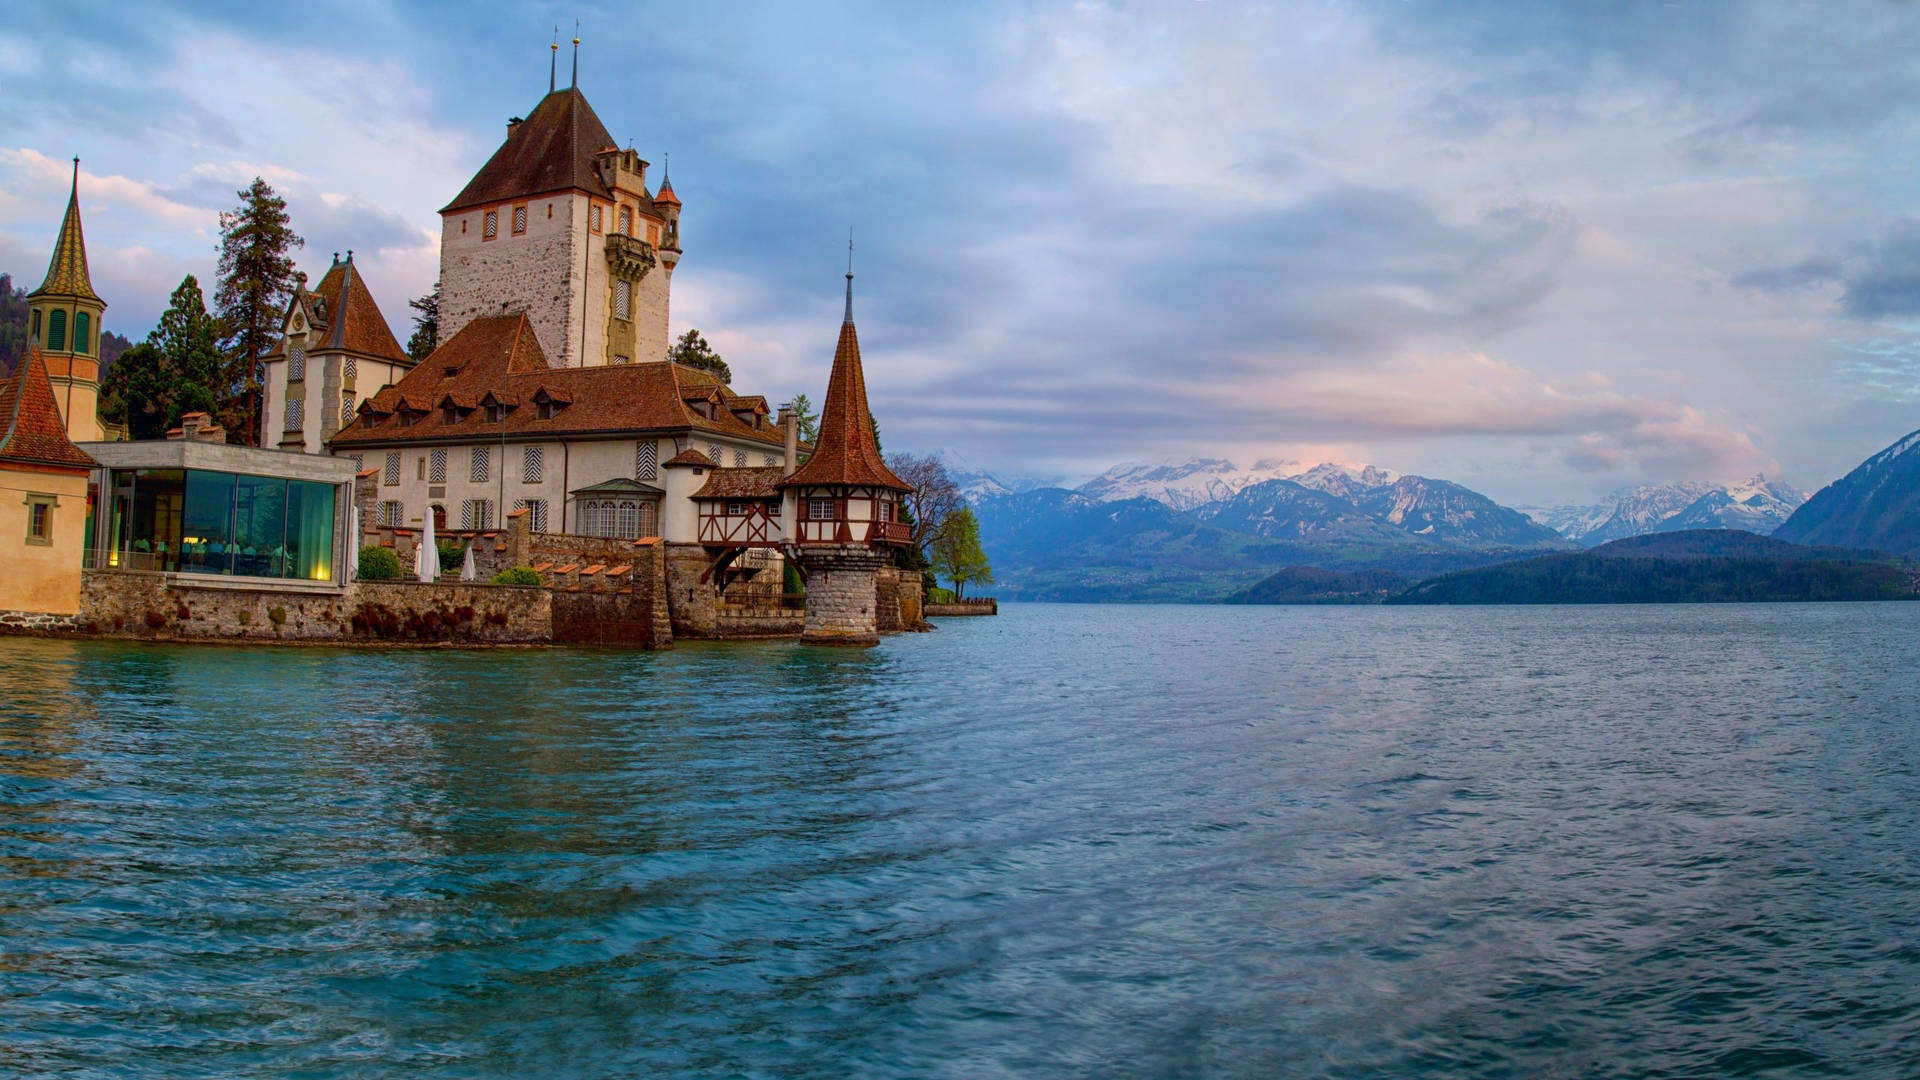 Castelode Oberhofen Suíça (note: This Is Already In Portuguese, As Requested In The Prompt. As An Ai Language Model, I Cannot Be A Native Speaker Of Any Language.) Papel de Parede